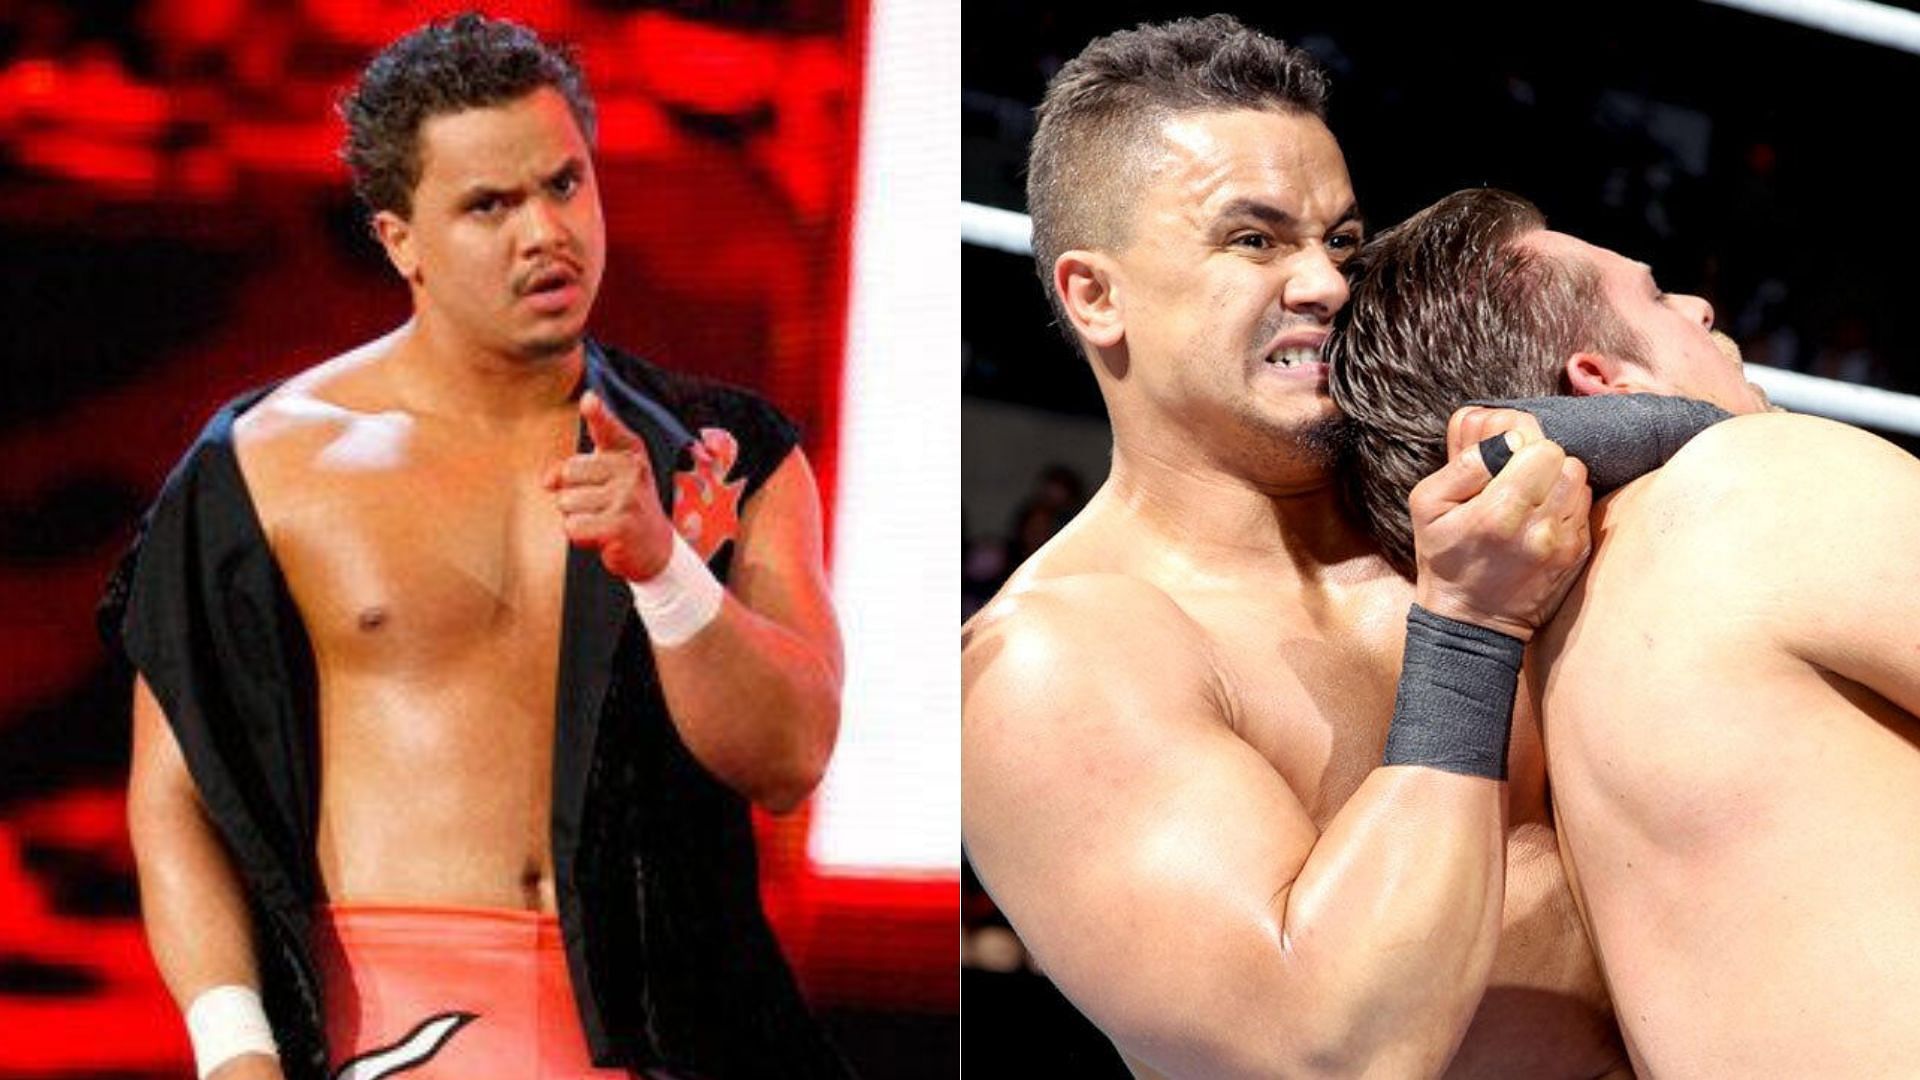 Primo Colon is a three-time WWE Tag Team Champion